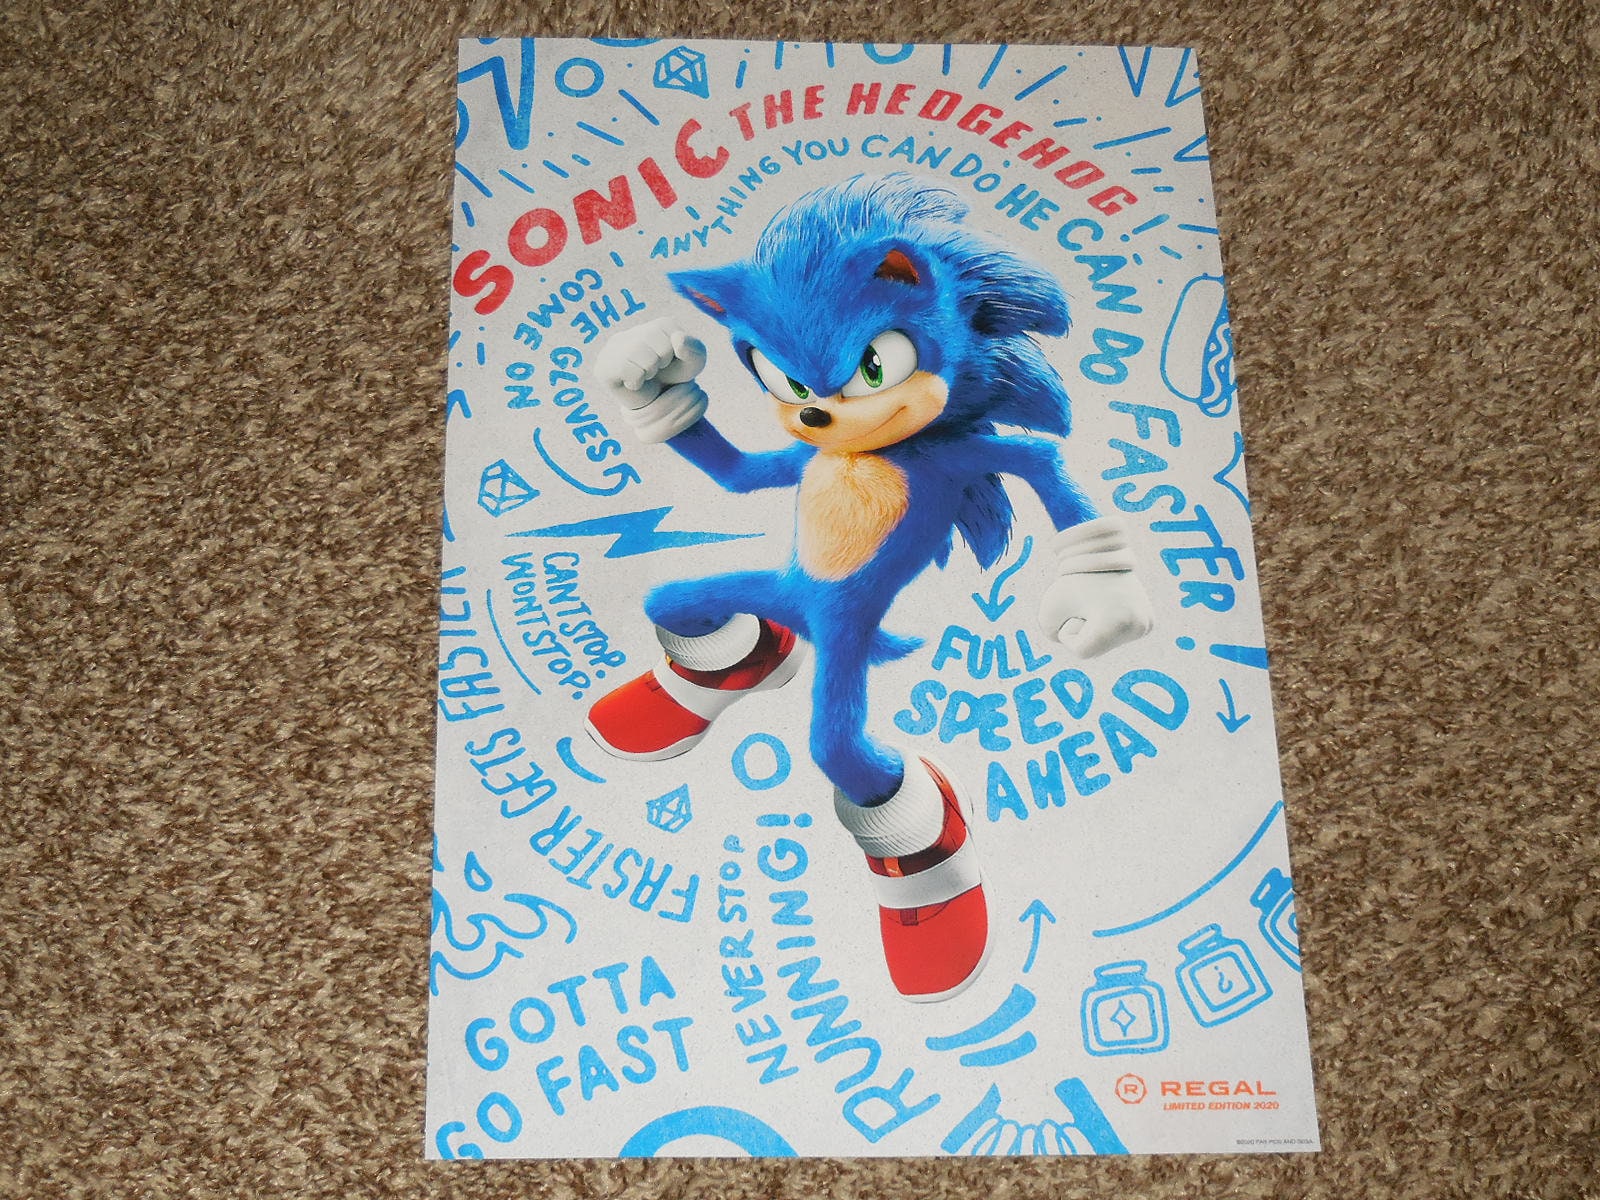 Sonic 2 Poster - Shop our Wide Selection for 2023